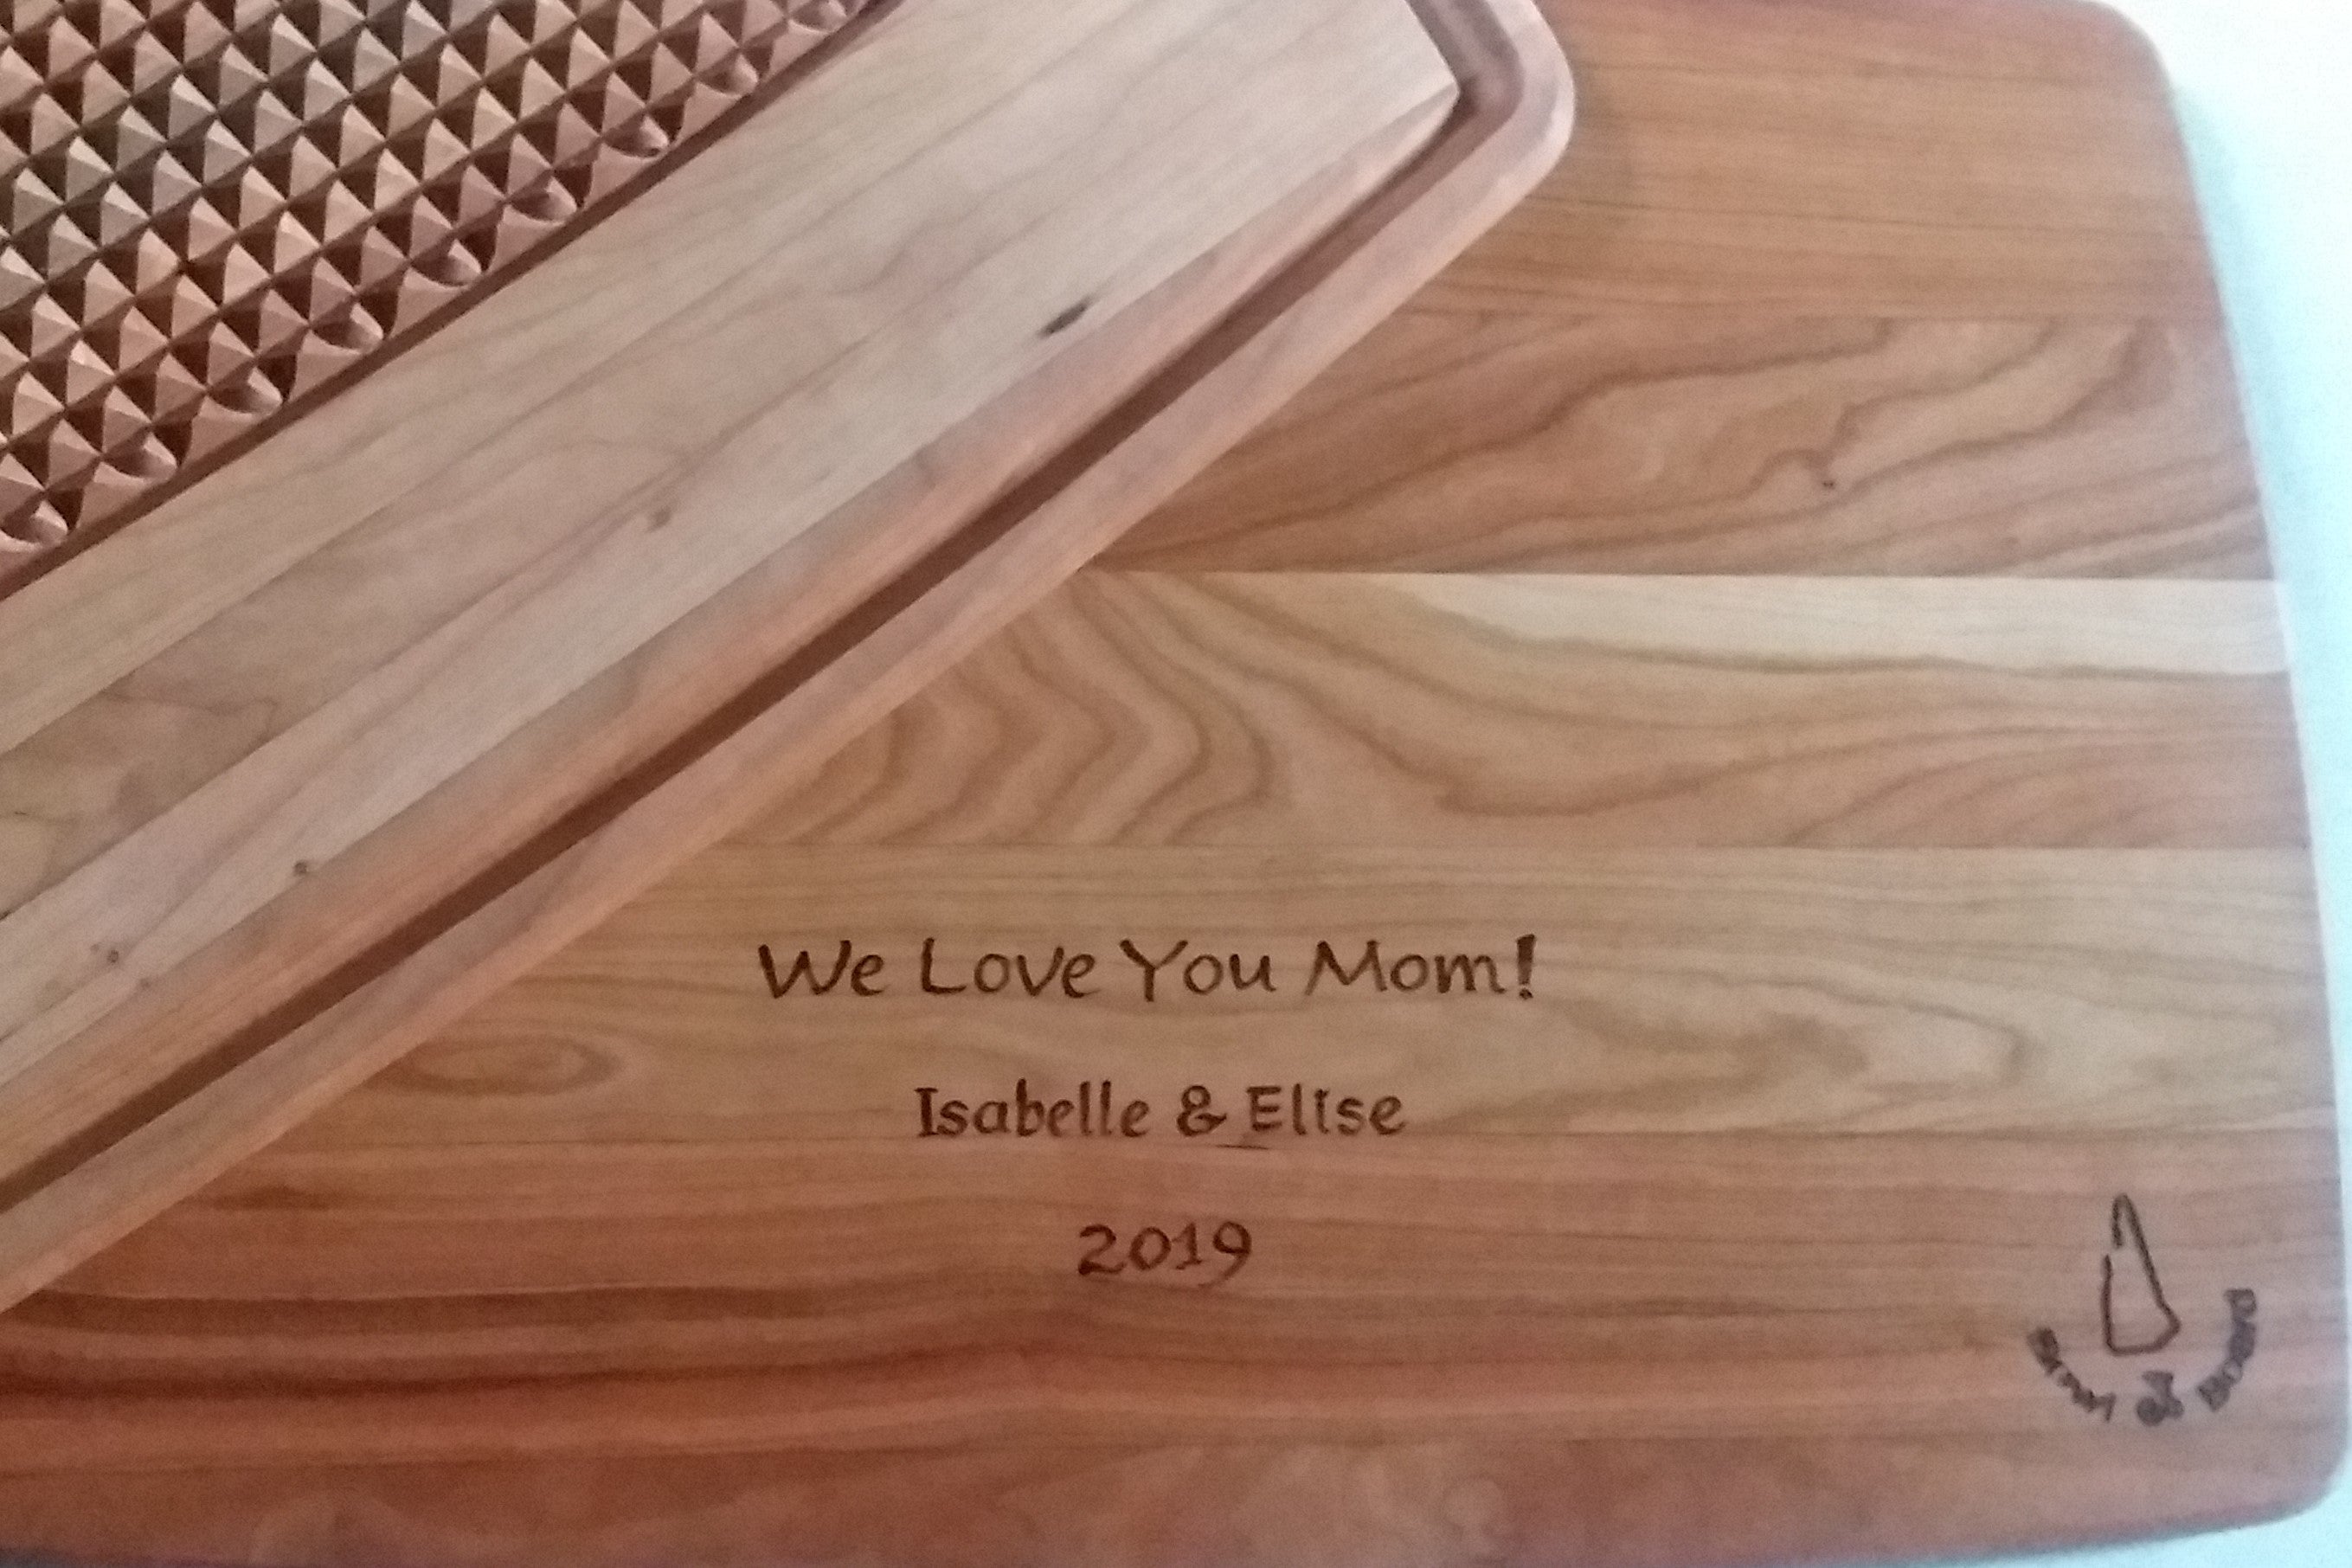 Extra Large Personalized Walnut Chopping Block With Juice Grooves